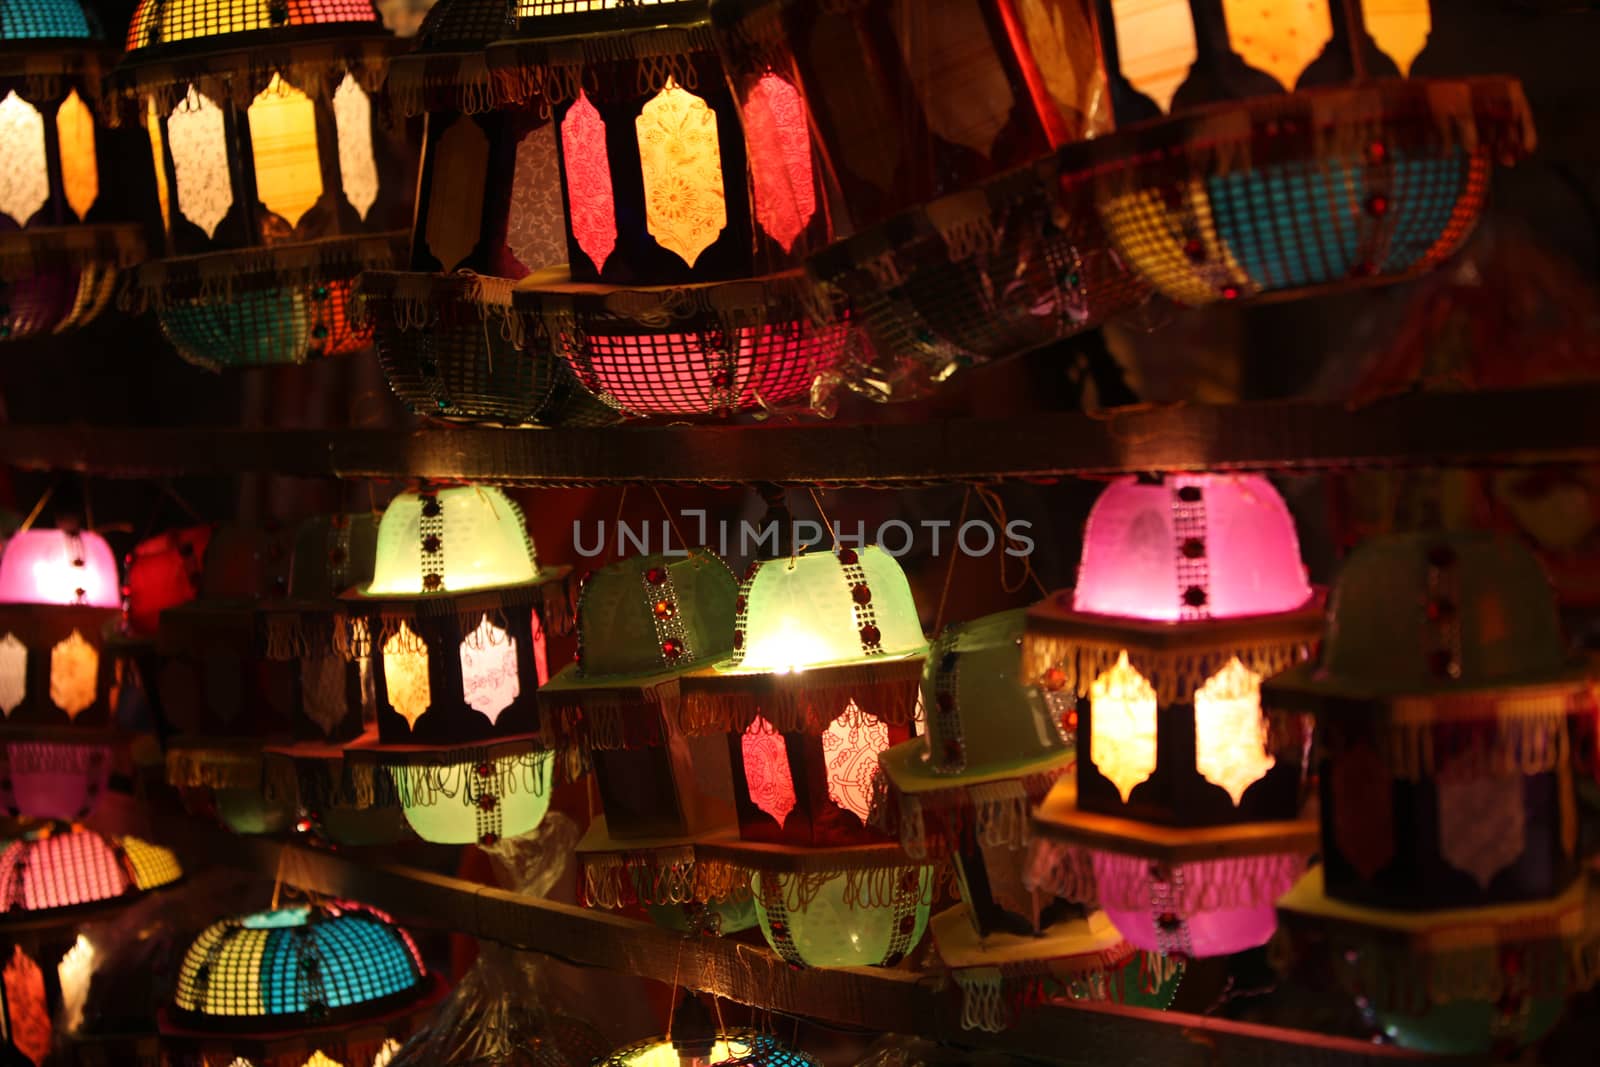 Beautiful traditional lanterns for sale in a shop on occasion of Diwali / Christmas festival in India